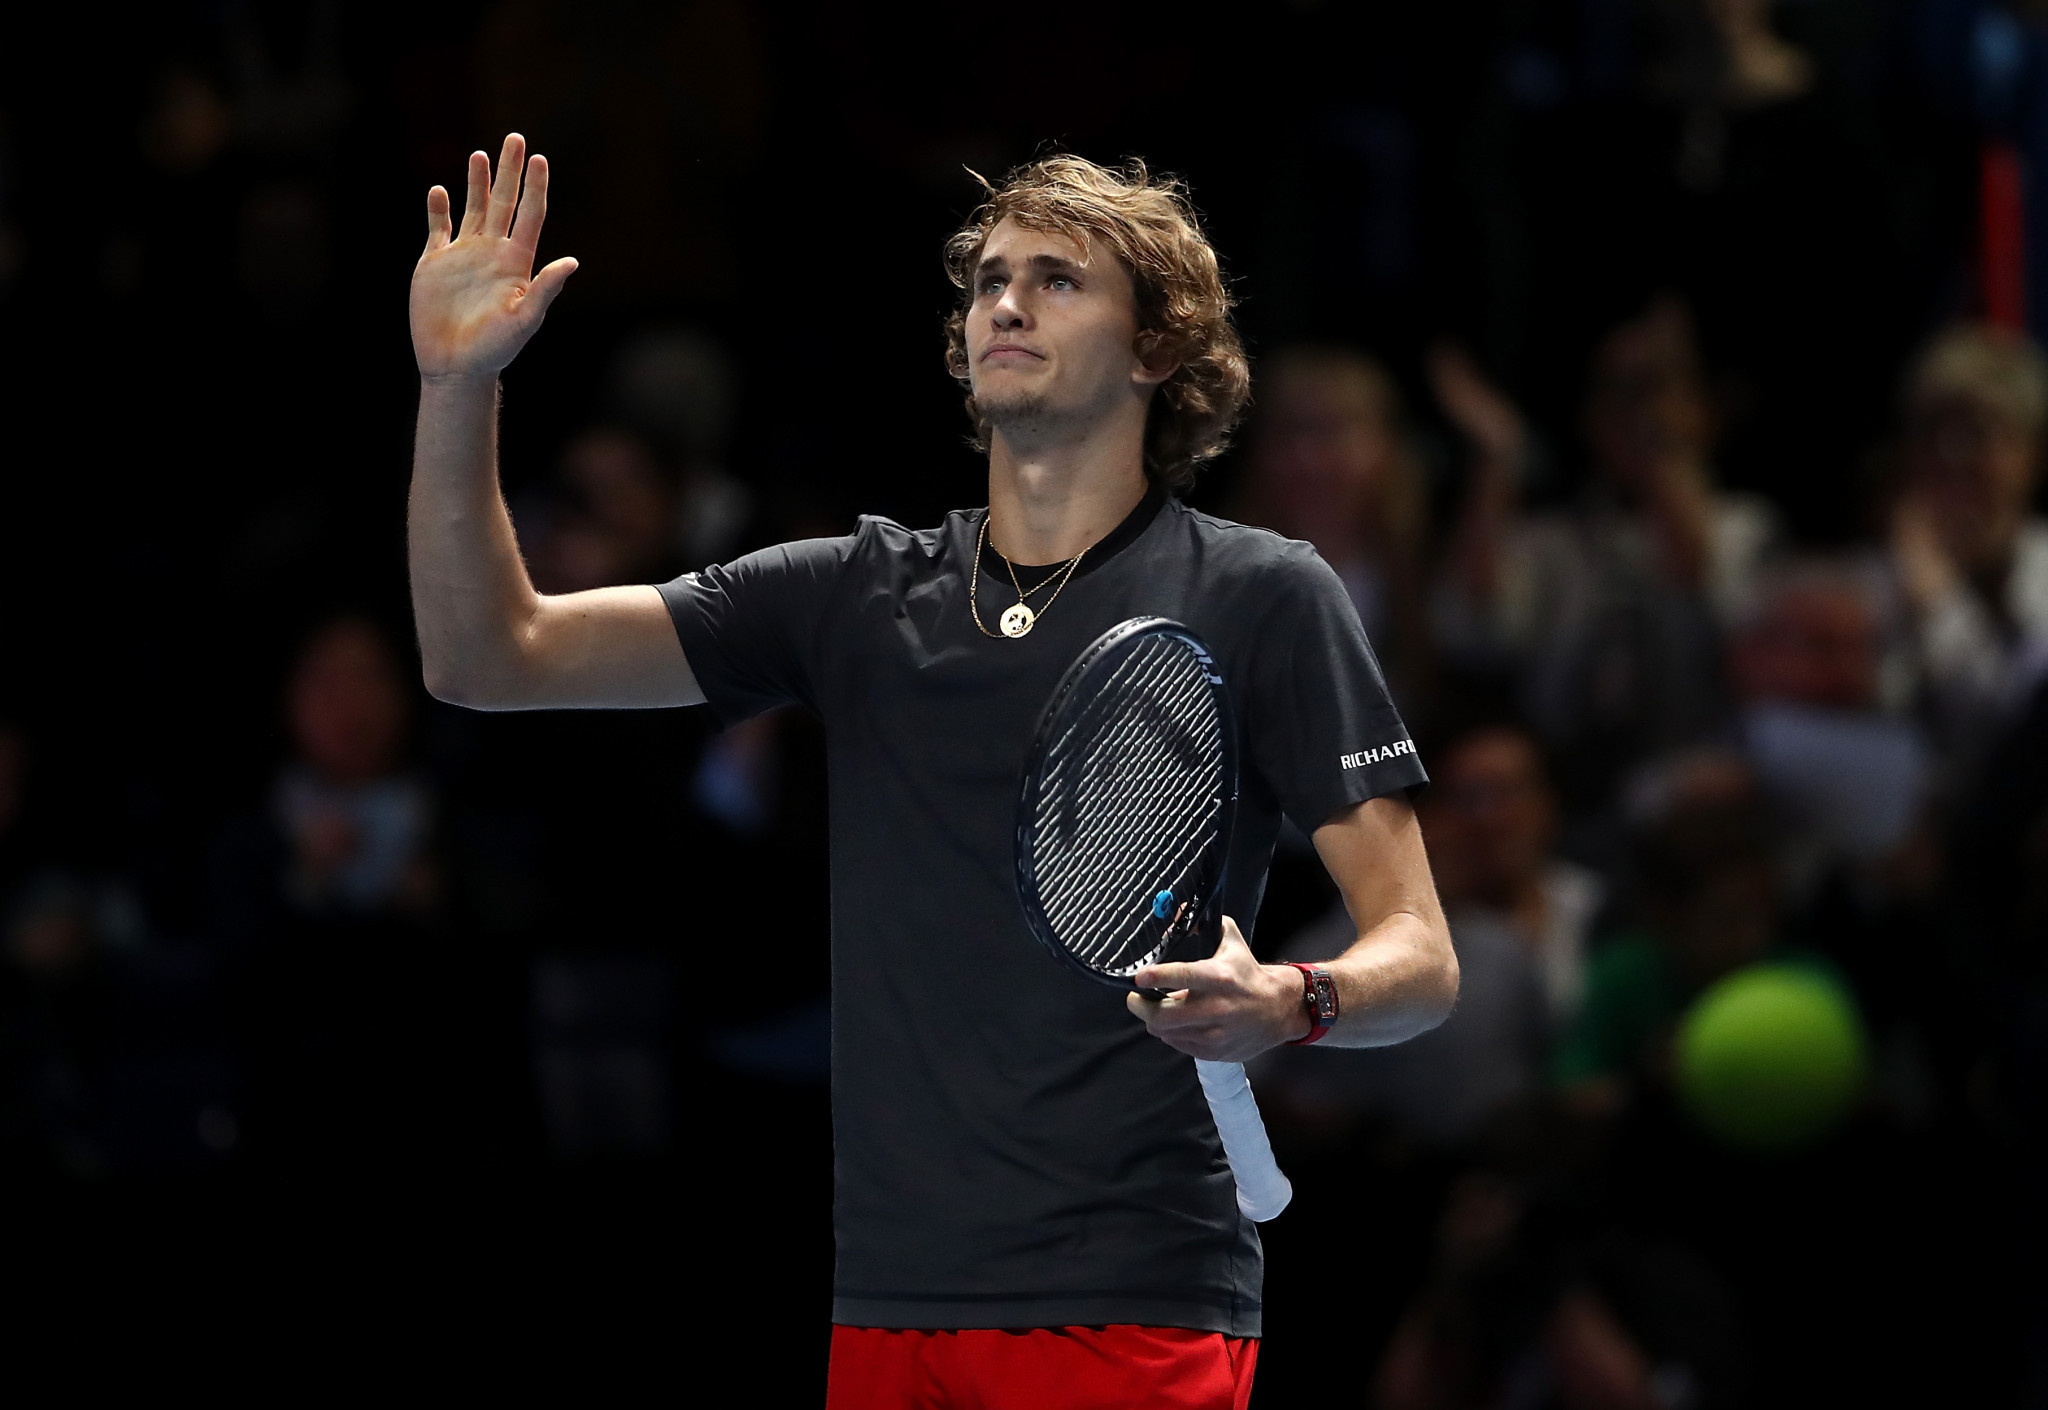 Alexander Zverev booked his place in the final despite a mixed reaction from the crowd ©Getty Images